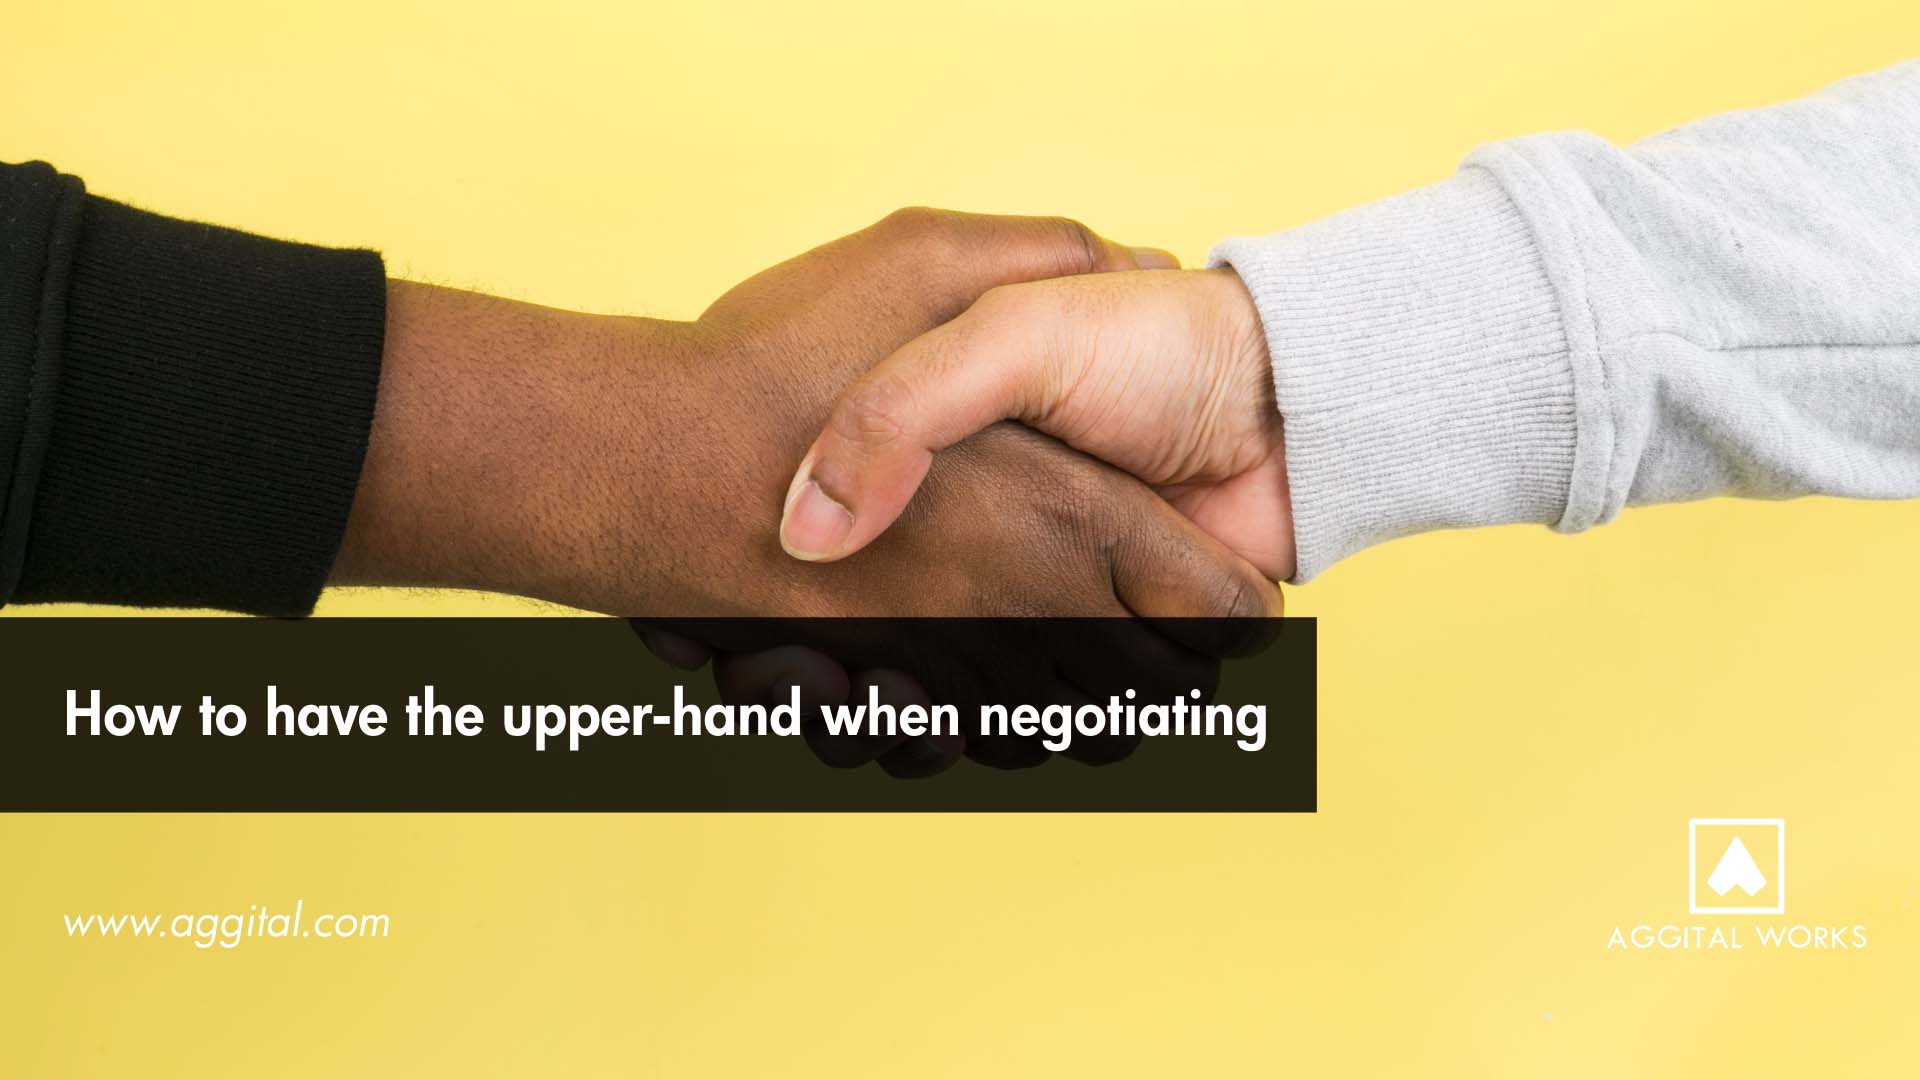 How to Have the Upper-Hand While Negotiating.